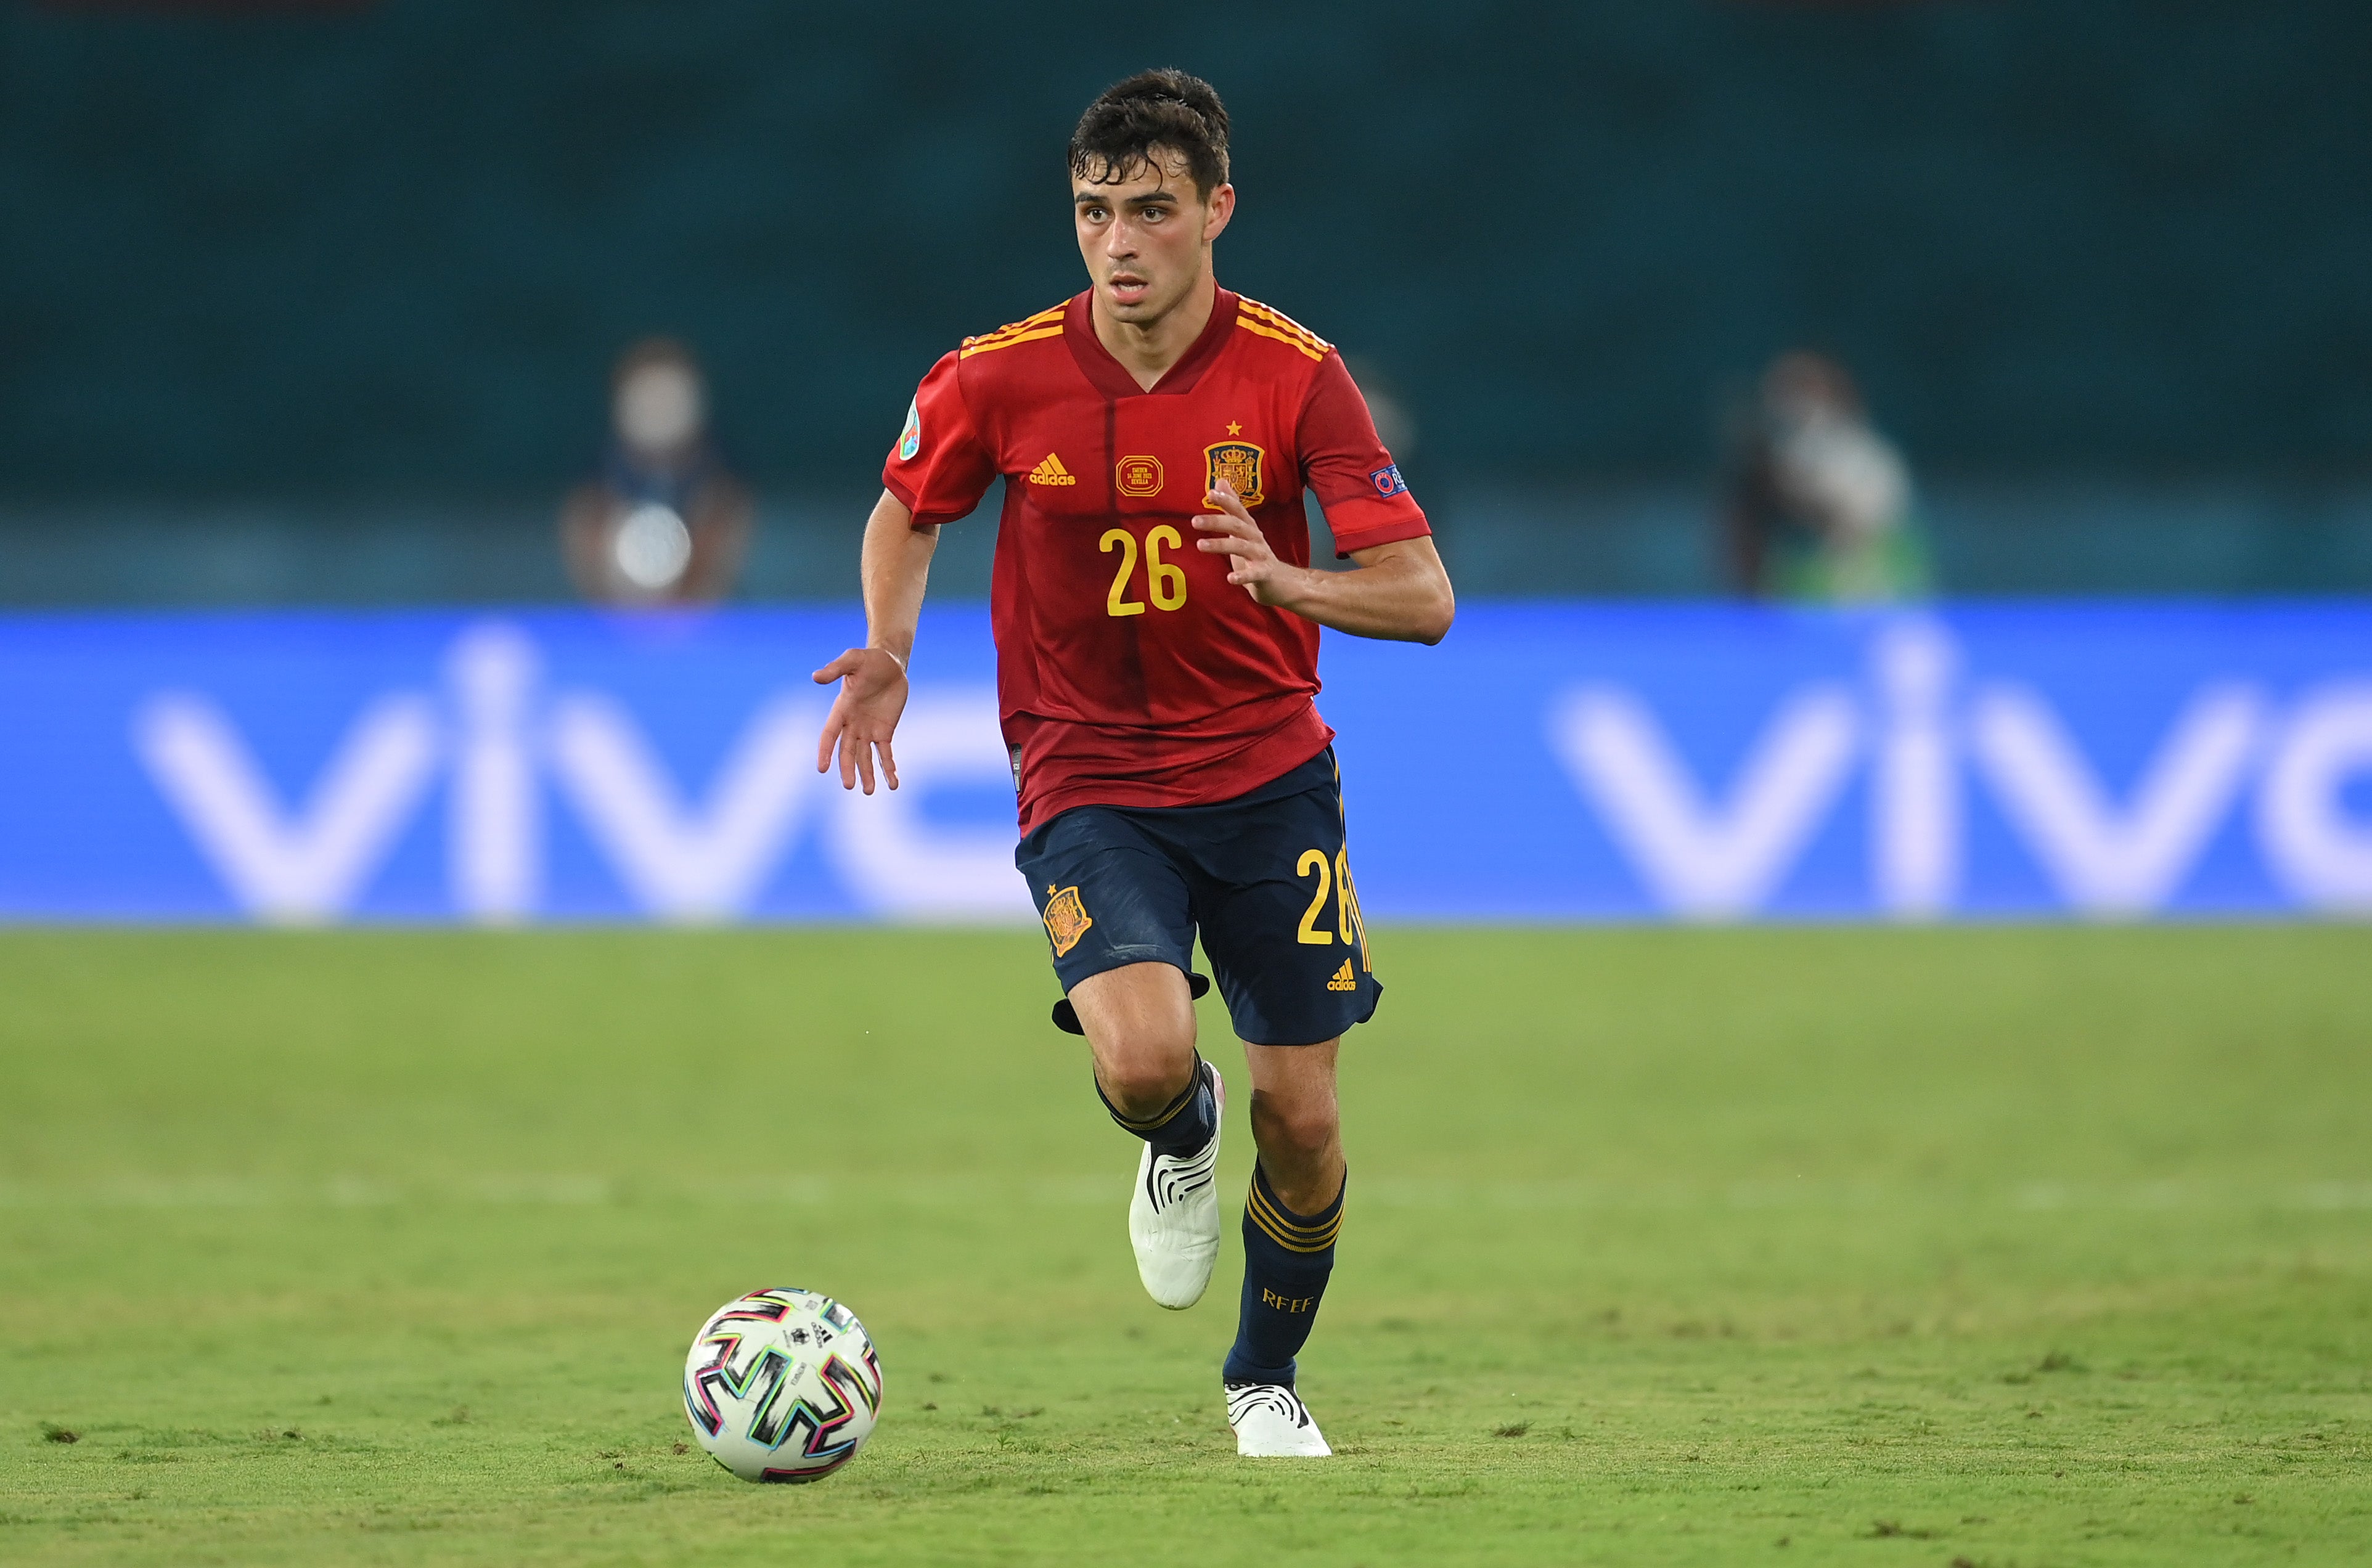 Pedri shone at Euro 2020, with his coach saying he is better than Andres Iniesta was at the same age